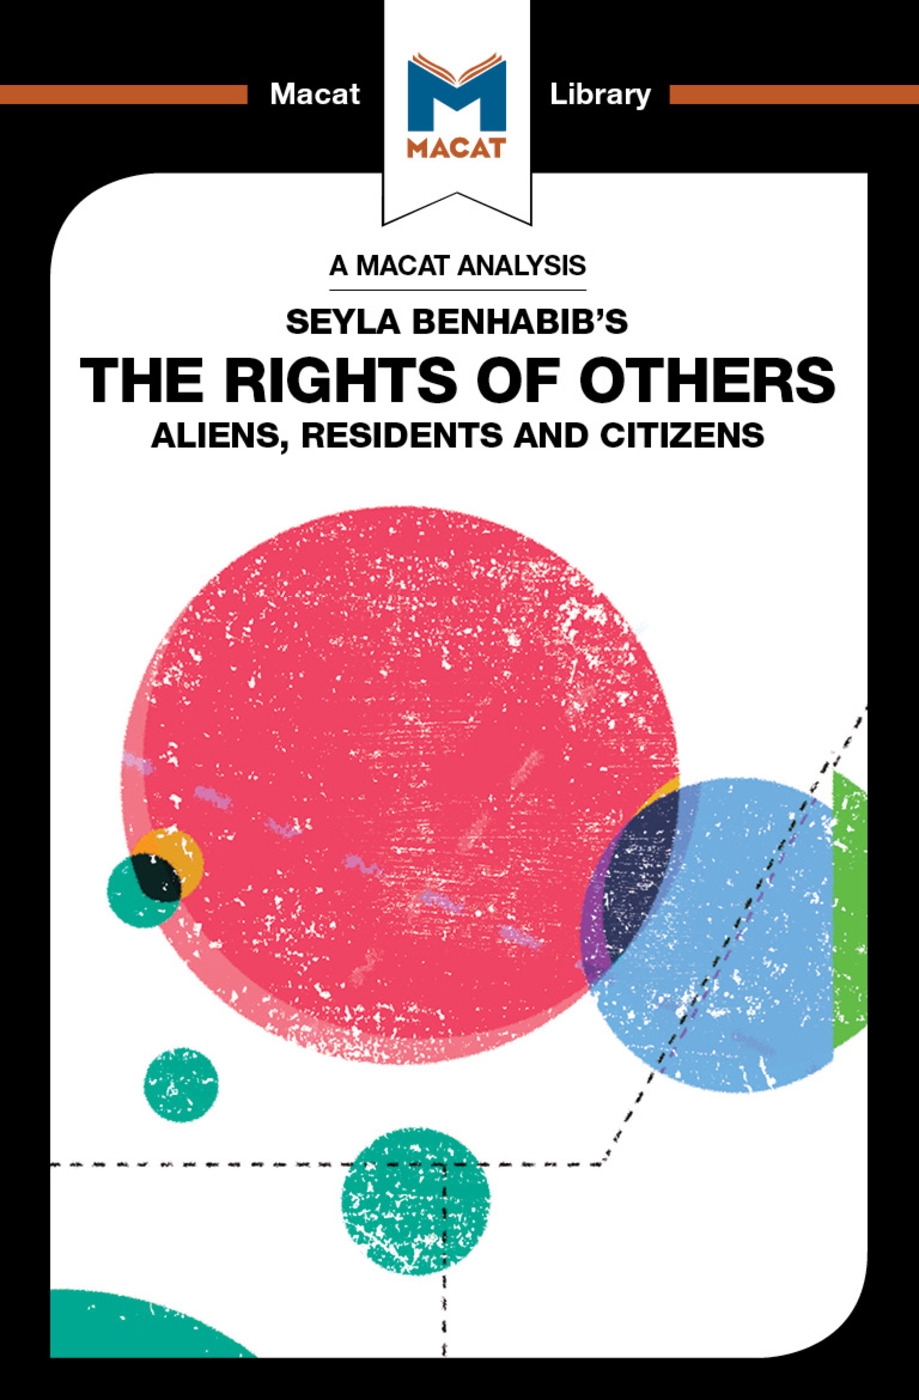 Seyla Benhabib’s the Rights of Others: Aliens, Residents, and Citizens